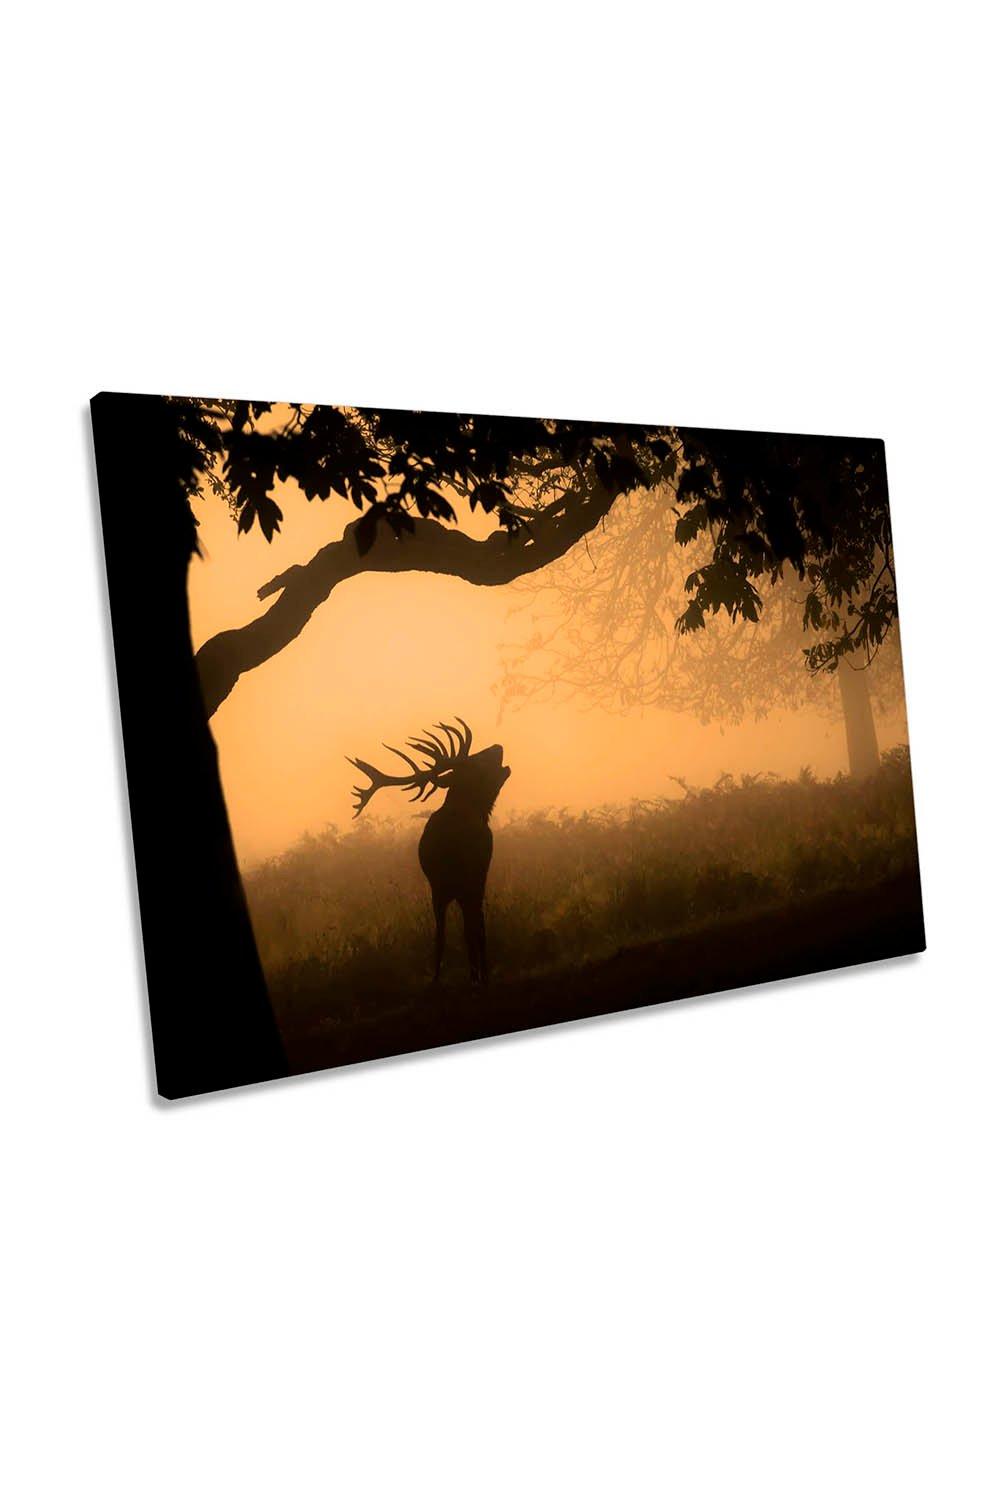 The Misty Love Call Deer Stag Antlers Canvas Wall Art Picture Print